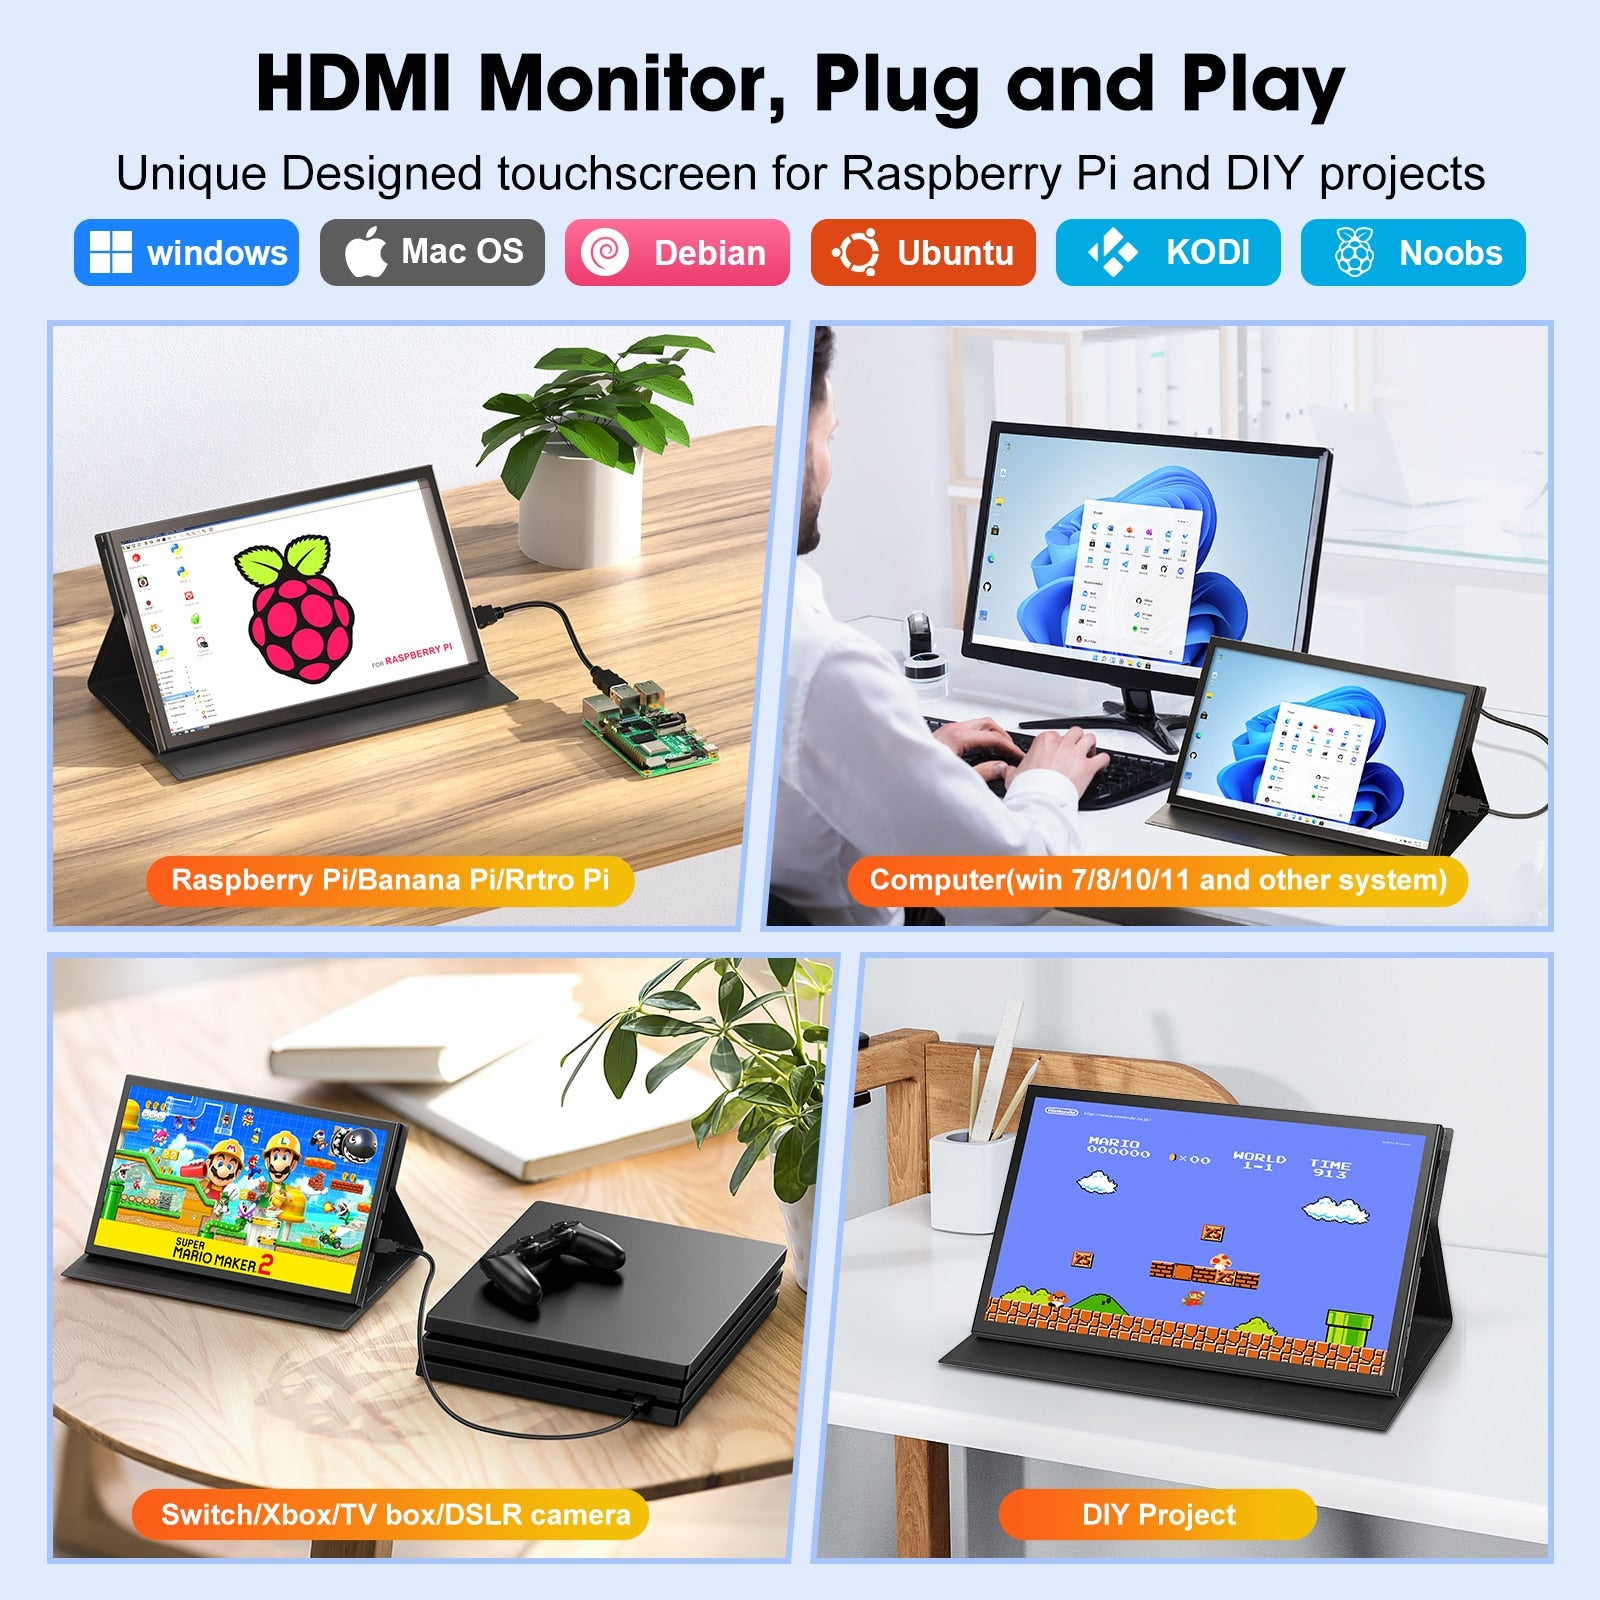 Miktver Driver Free 10.1 Inch Capacitive Touch Screen 1024*600 Portable HDMI Gaming Monitor 3ms Response Compatible Raspberry Pi